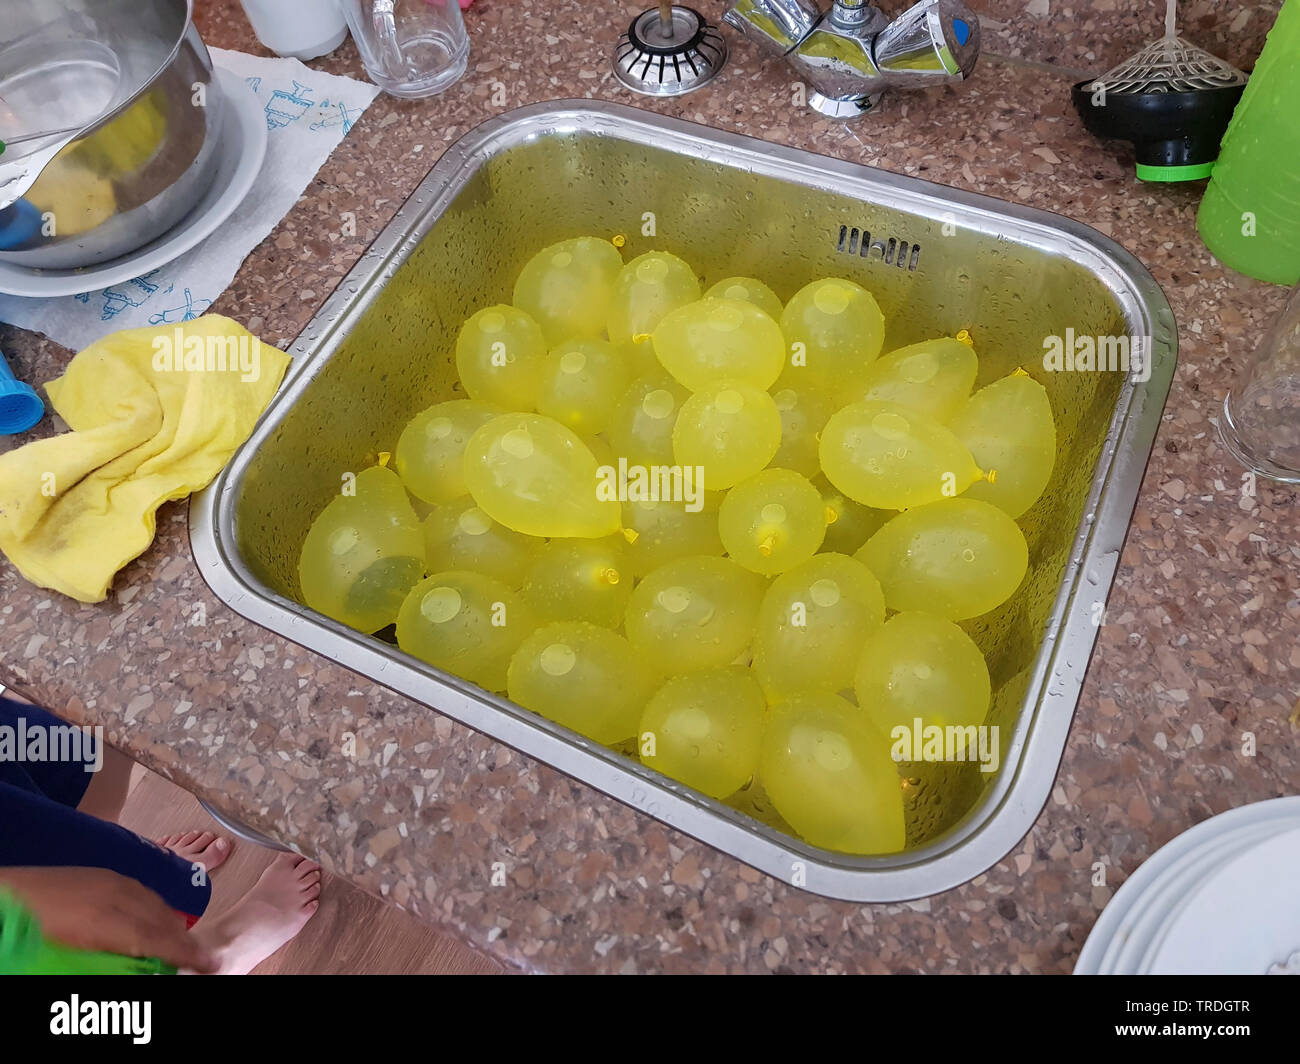 filled water bombs in a washbasin, Germany Stock Photo